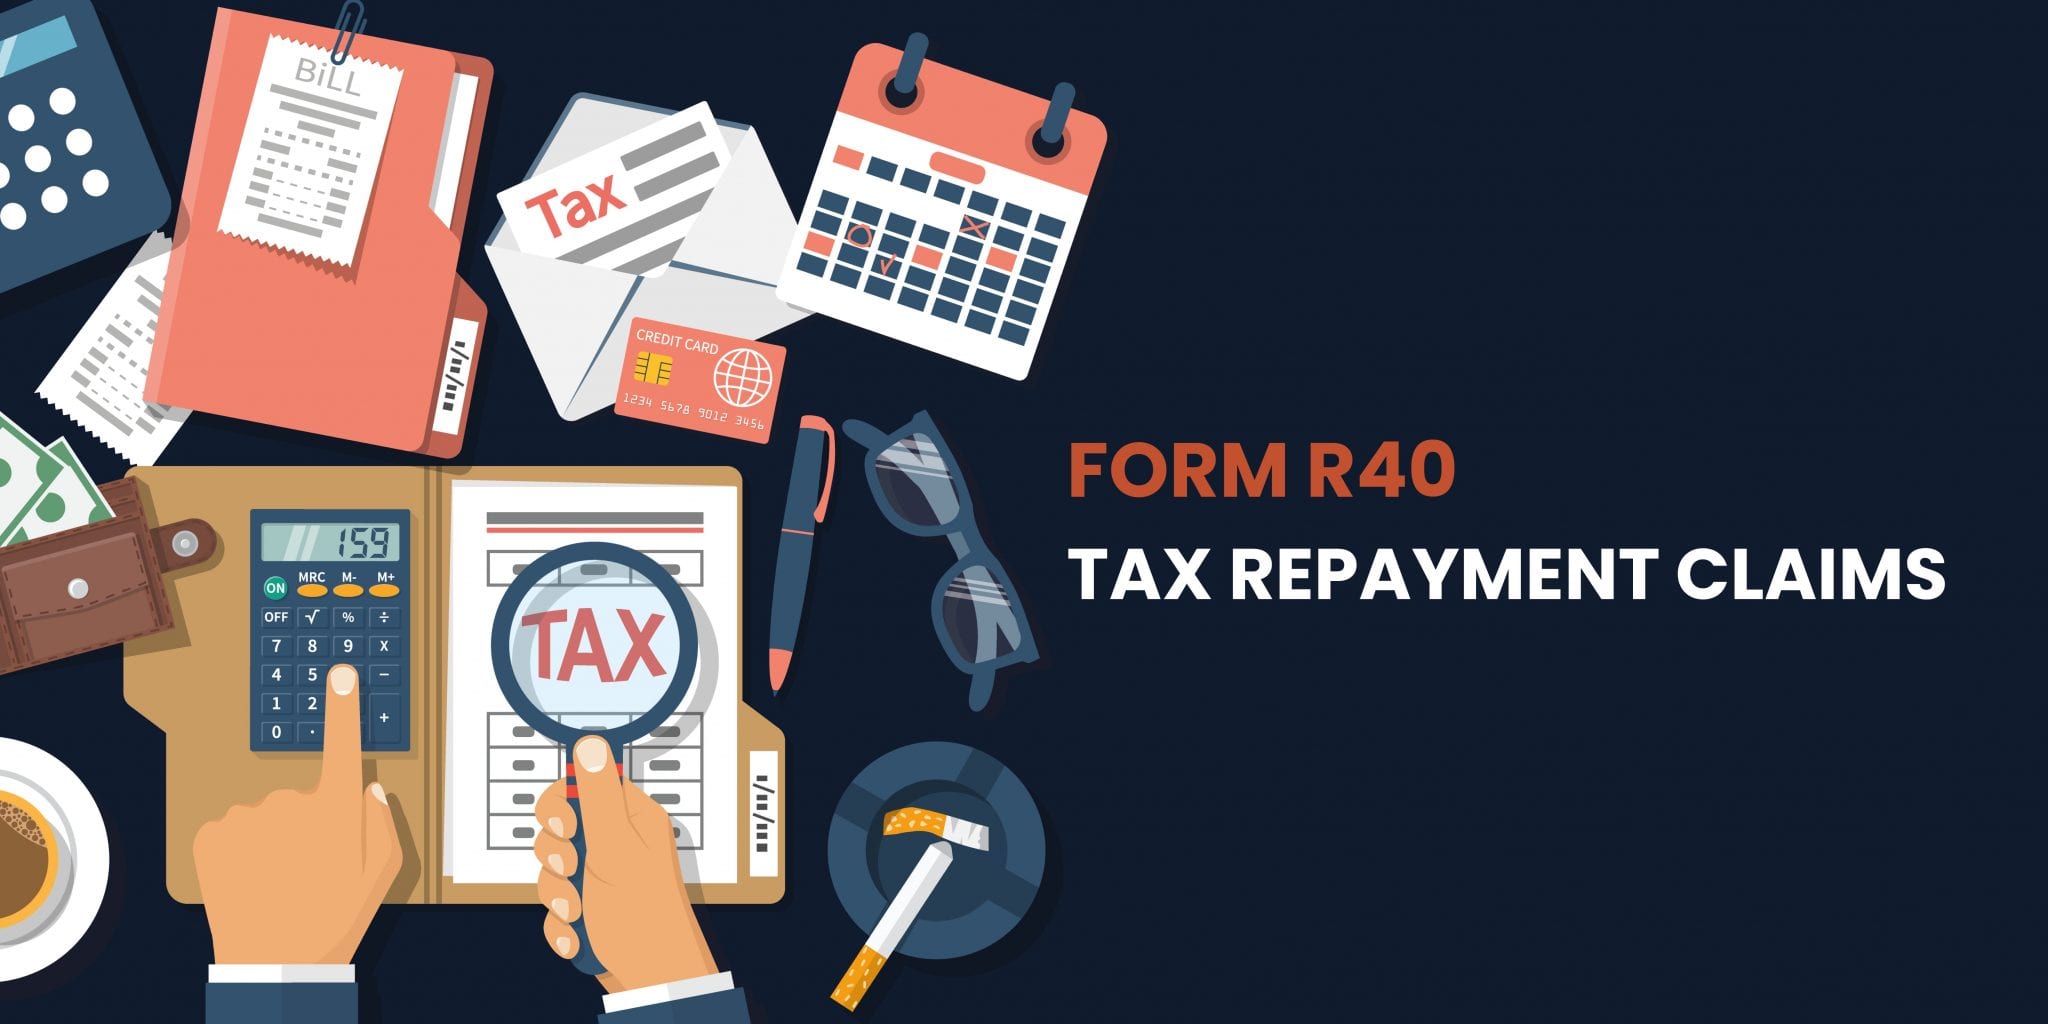 form-r40-tax-repayment-claims-lewis-brownlee-chartered-accountants